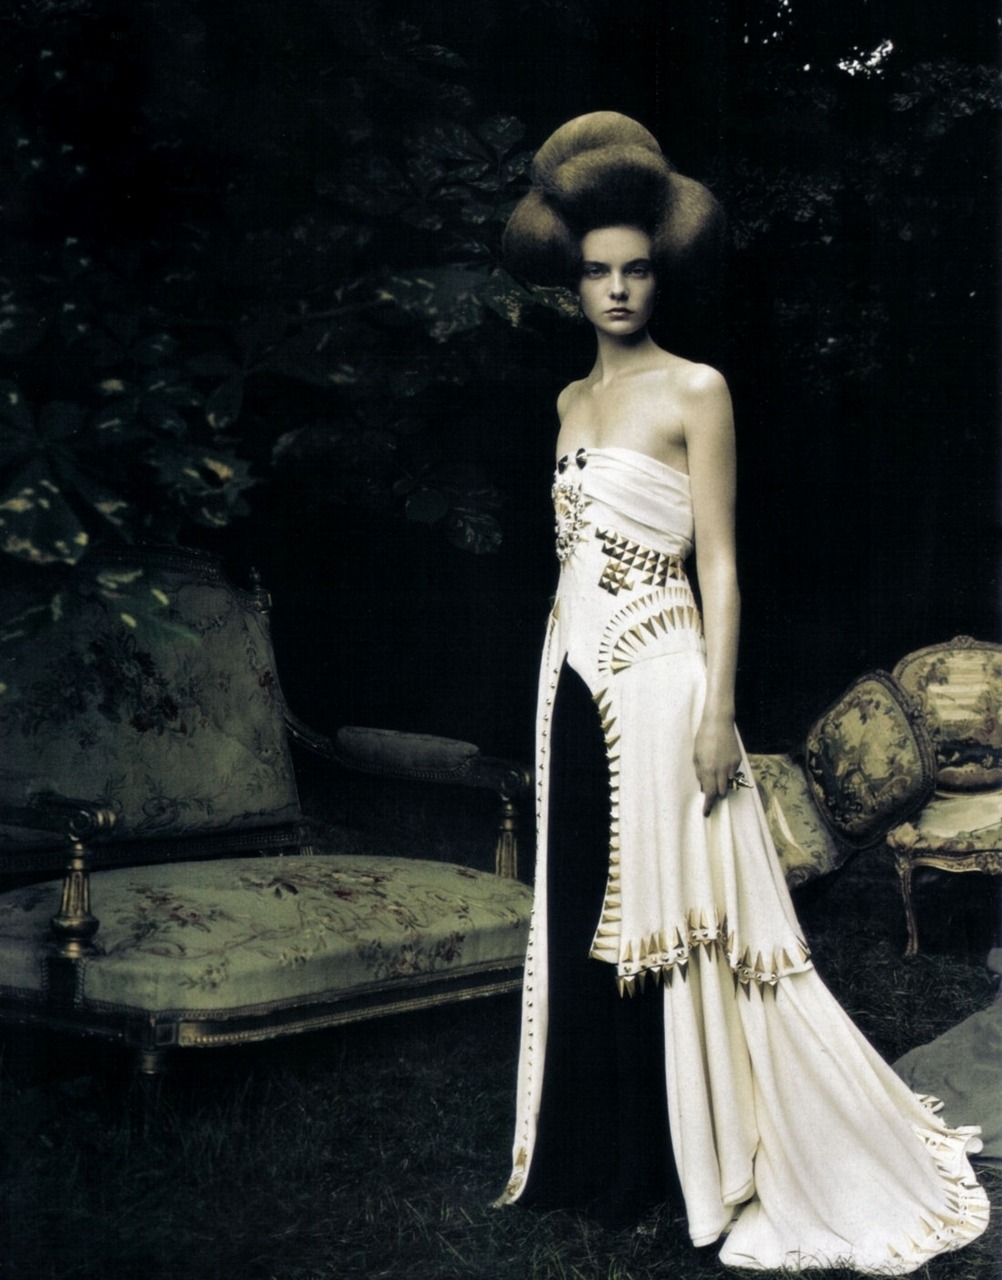 Nimue Smit in Givenchy by Paolo Roversi for Vogue Italia